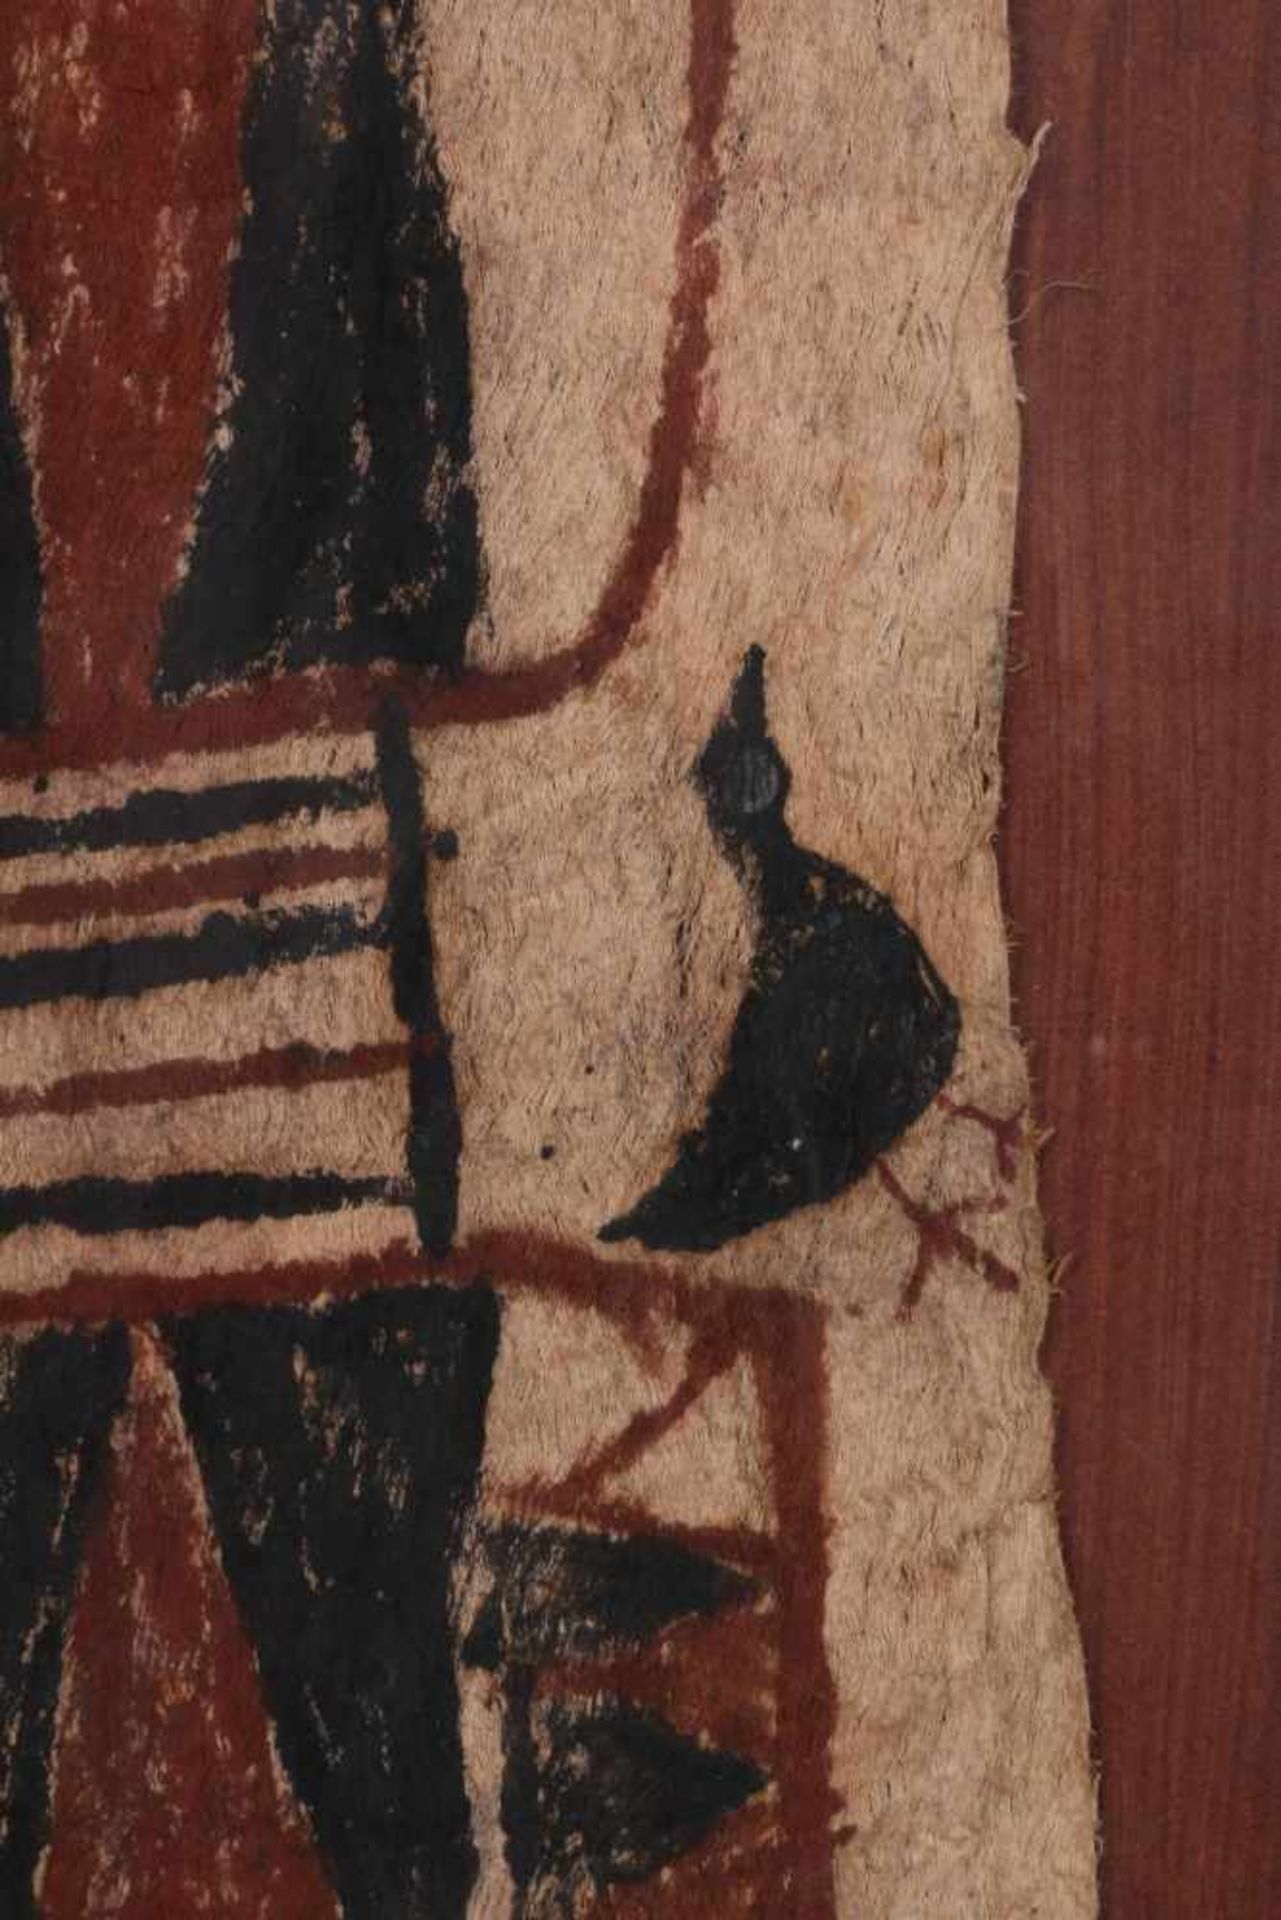 PNG, beschilderde tappawith birds and division patterns, l. 111 and w. 36 cm. [1]200 - Bild 2 aus 2